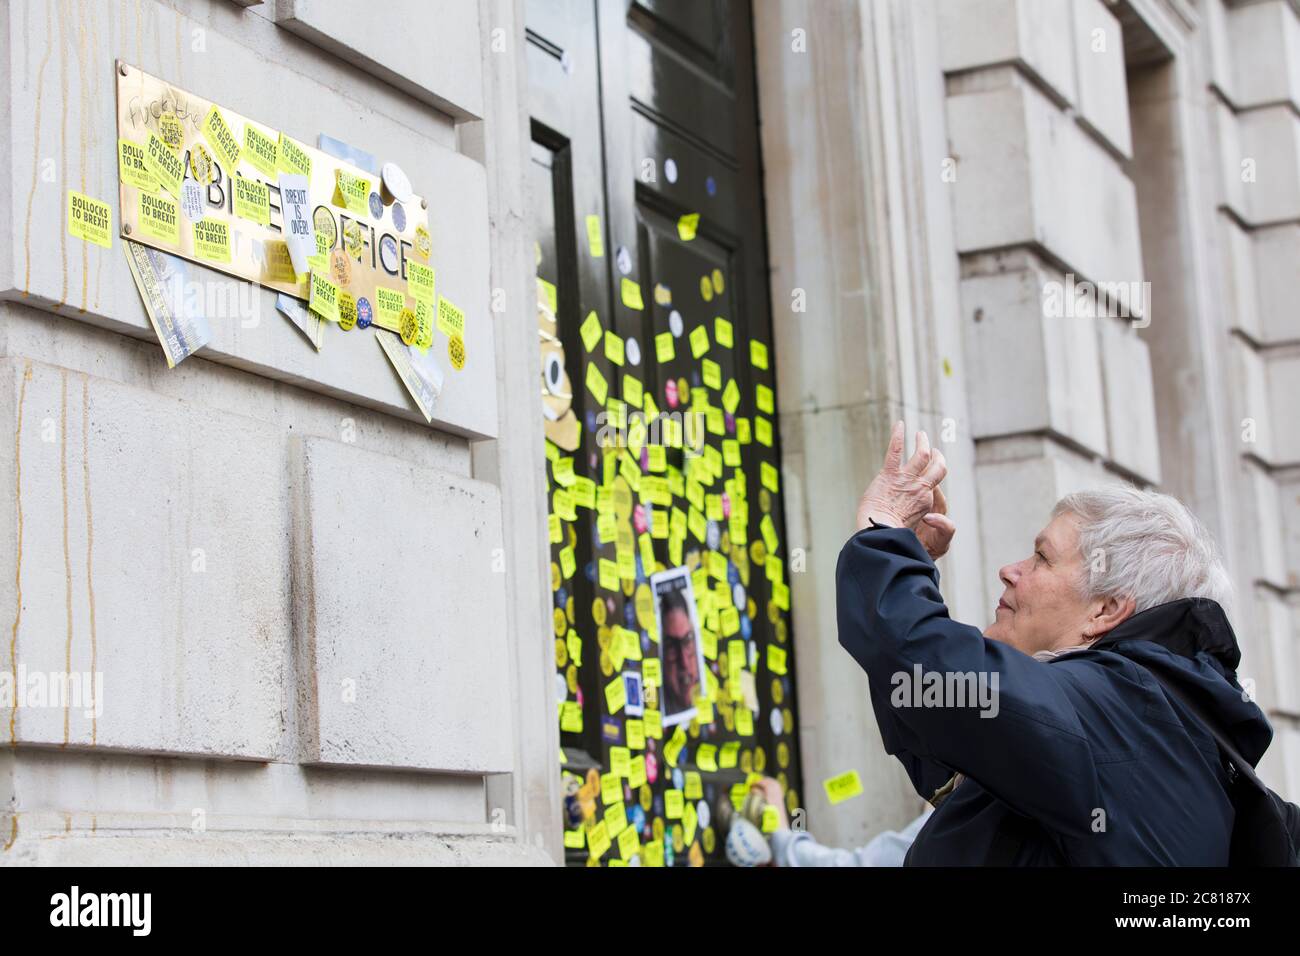 LONDON, UK - March, 2019: The UK Cabinet Office covered in Anti Brexit stickers Stock Photo